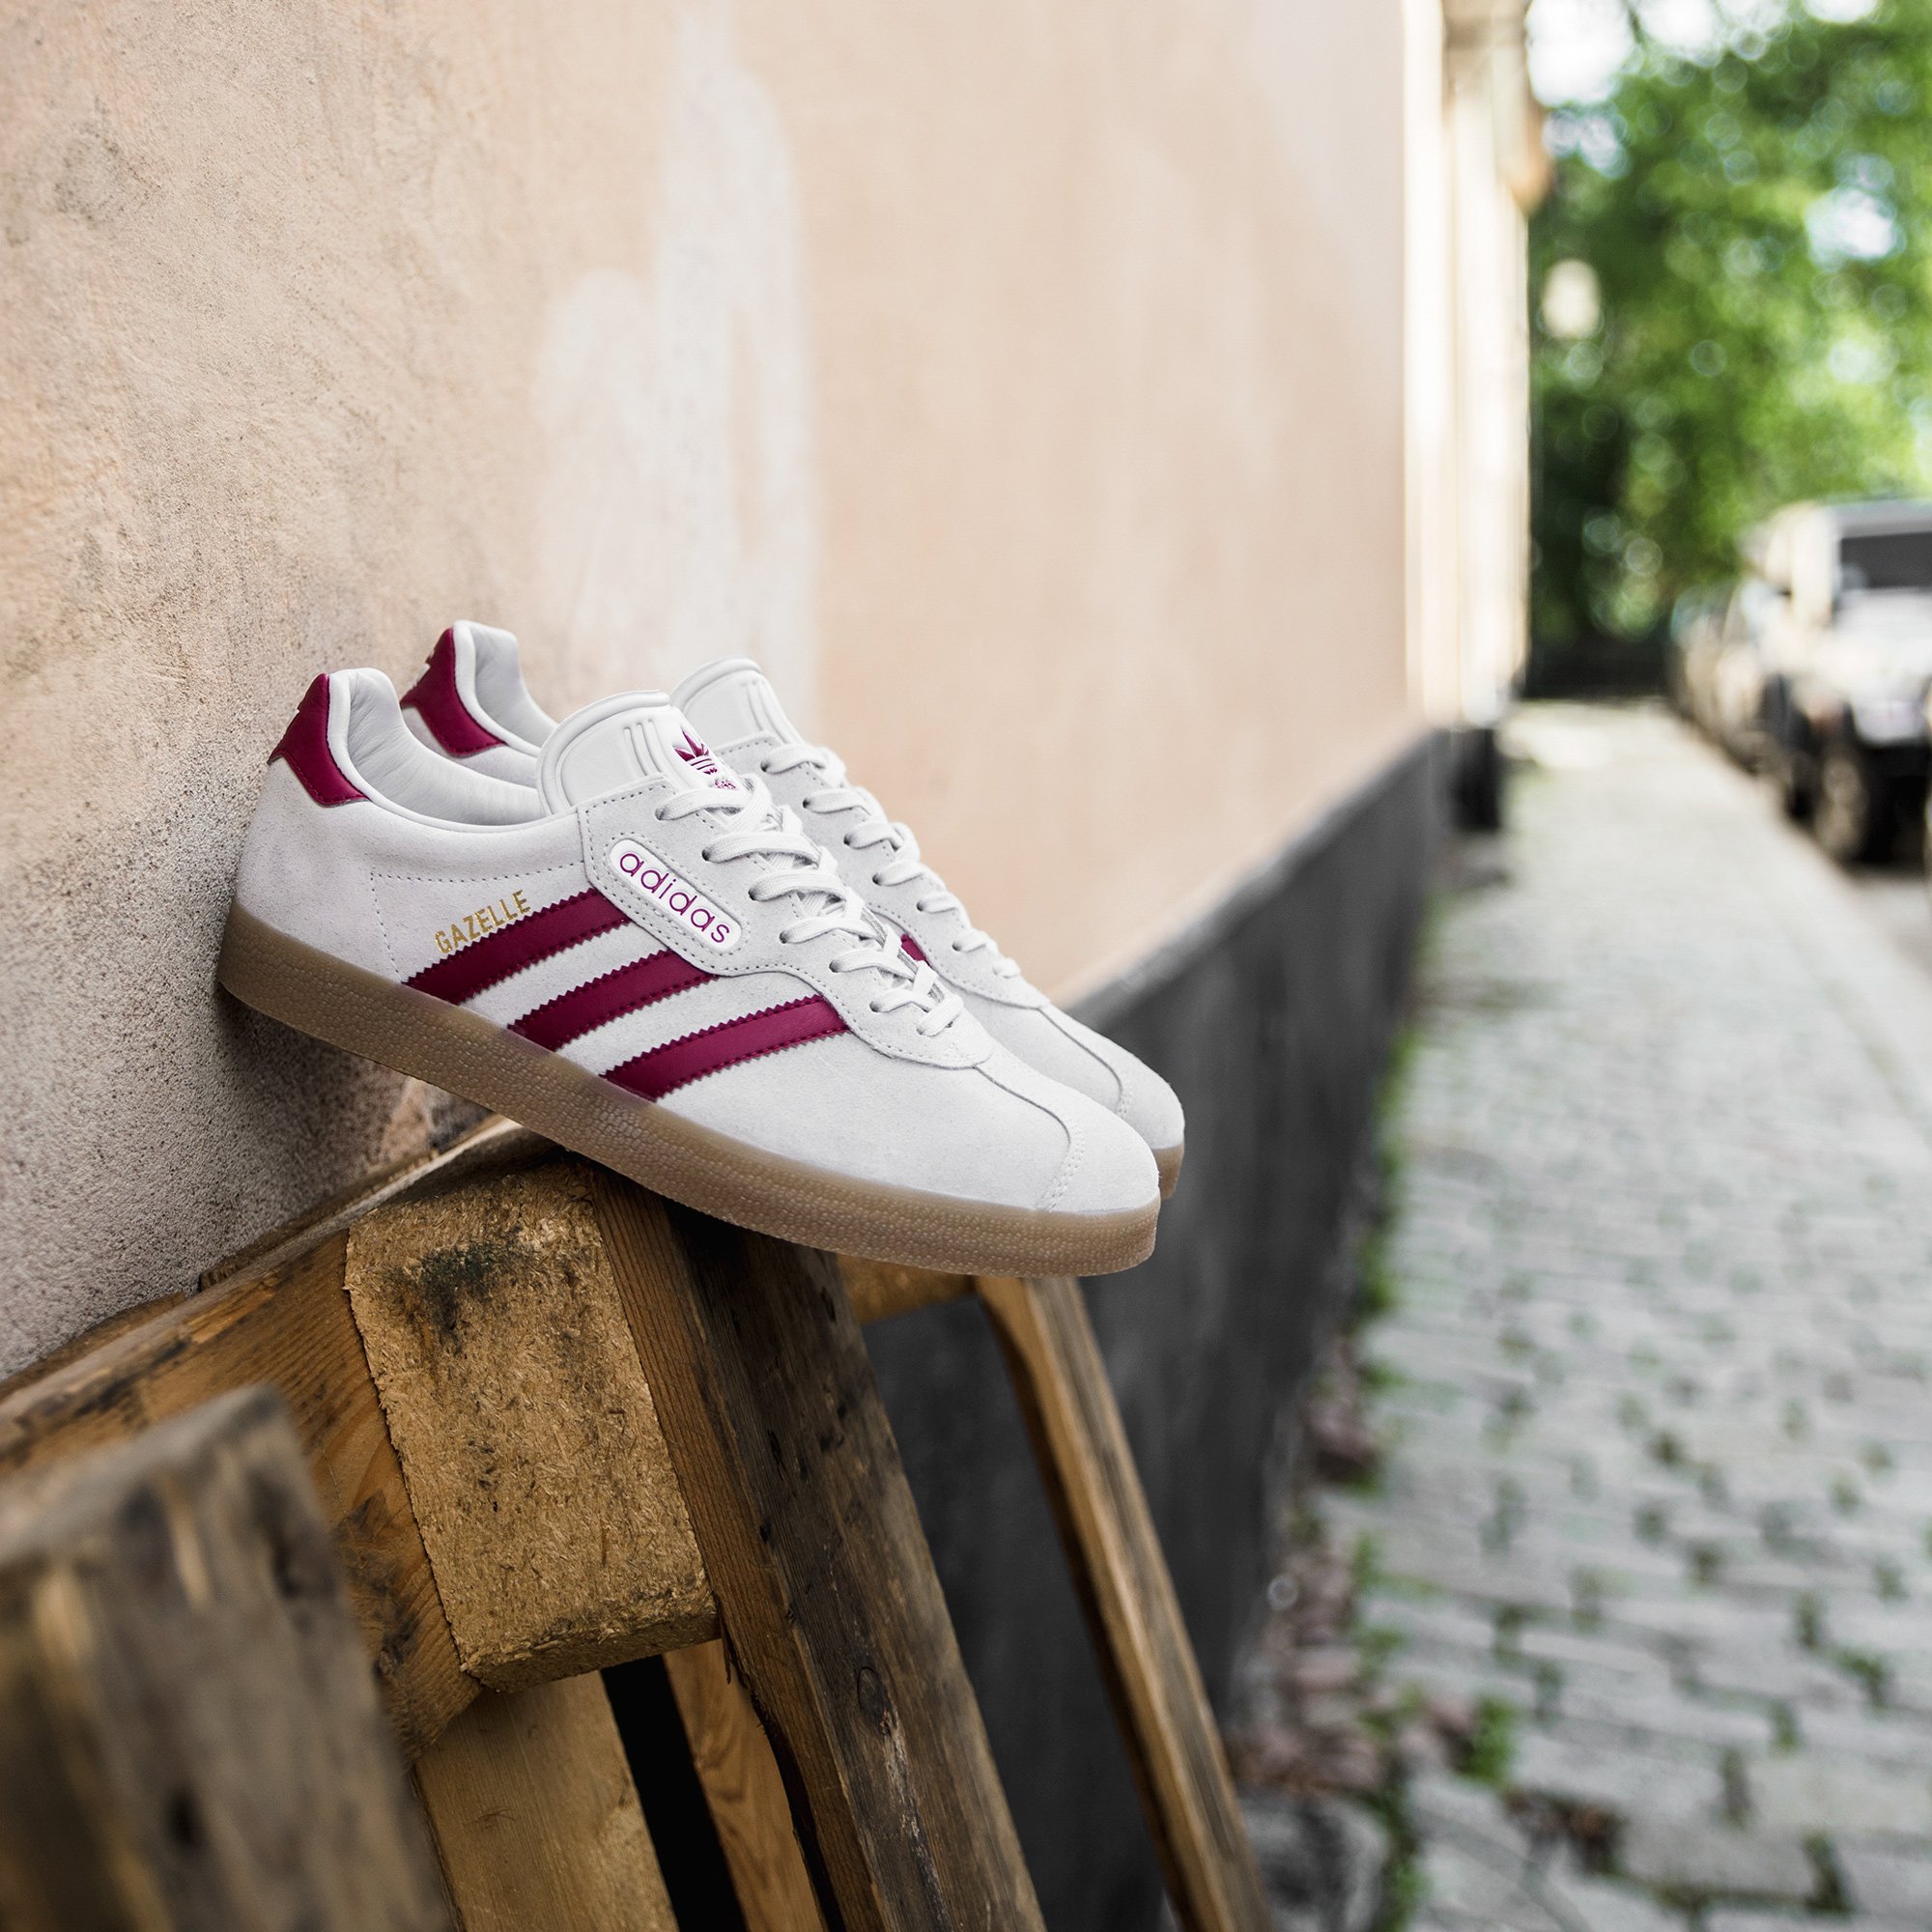 peber muggen rapport SNS on Twitter: "🍷 Check out the adidas Originals Gazelle Super "Grey  One/Mystery Ruby/Gold Metallic” — Find your size here:  https://t.co/tTpZYoSqr9. https://t.co/fNSxI9X3wa" / Twitter